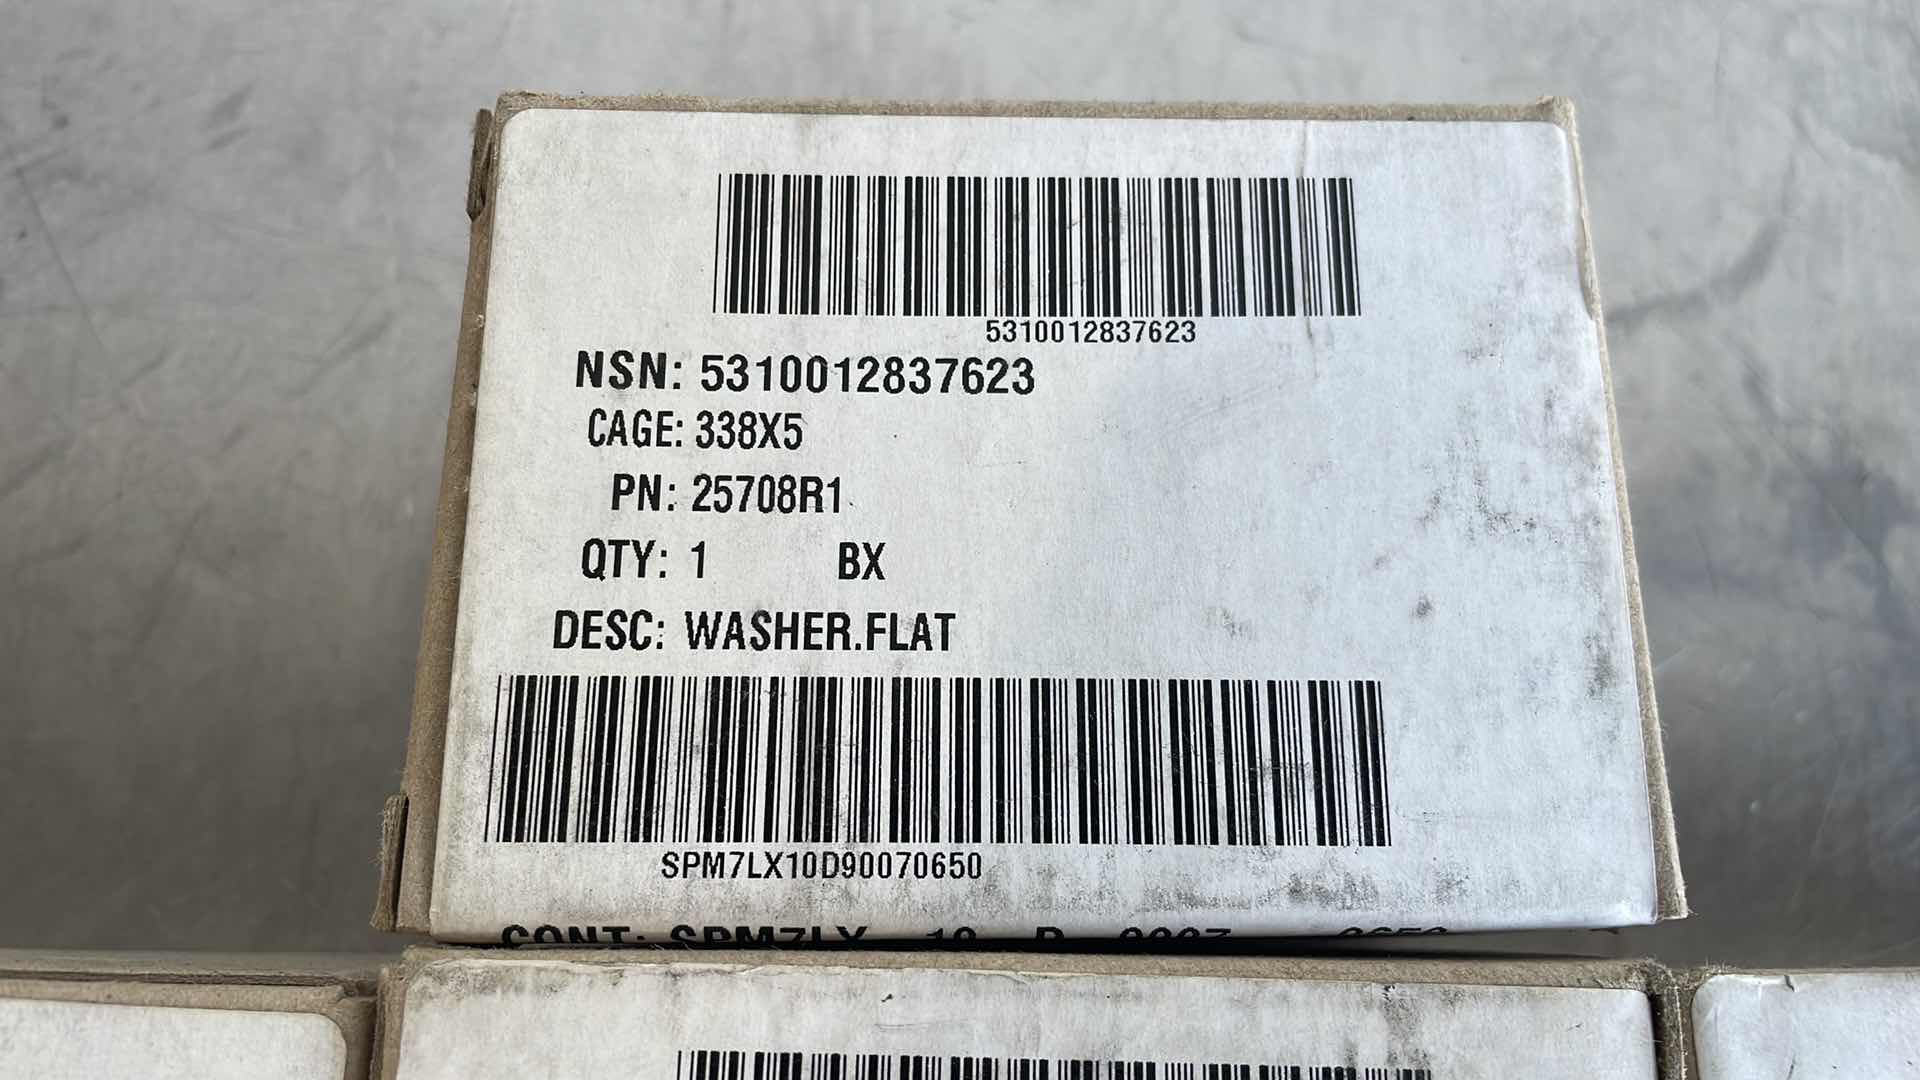 Photo 2 of FLAT WASHER 5/16” PN 25708R1 (7 BOXES)